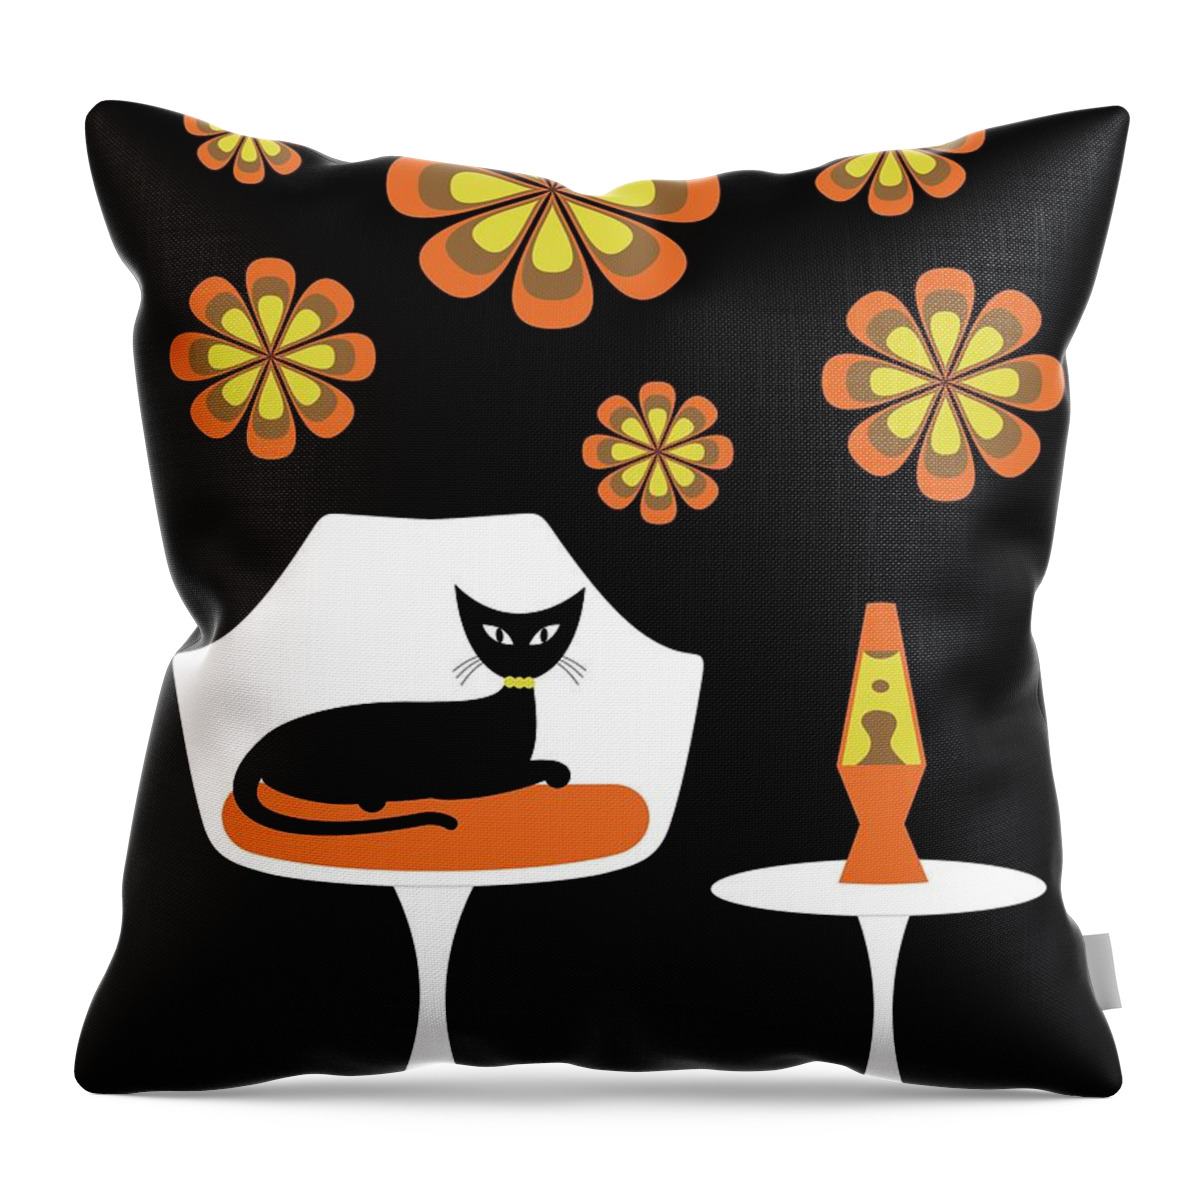 Mid Century Cat Throw Pillow featuring the digital art Mid Century Tulip Chair with Orange Mod Flowers by Donna Mibus